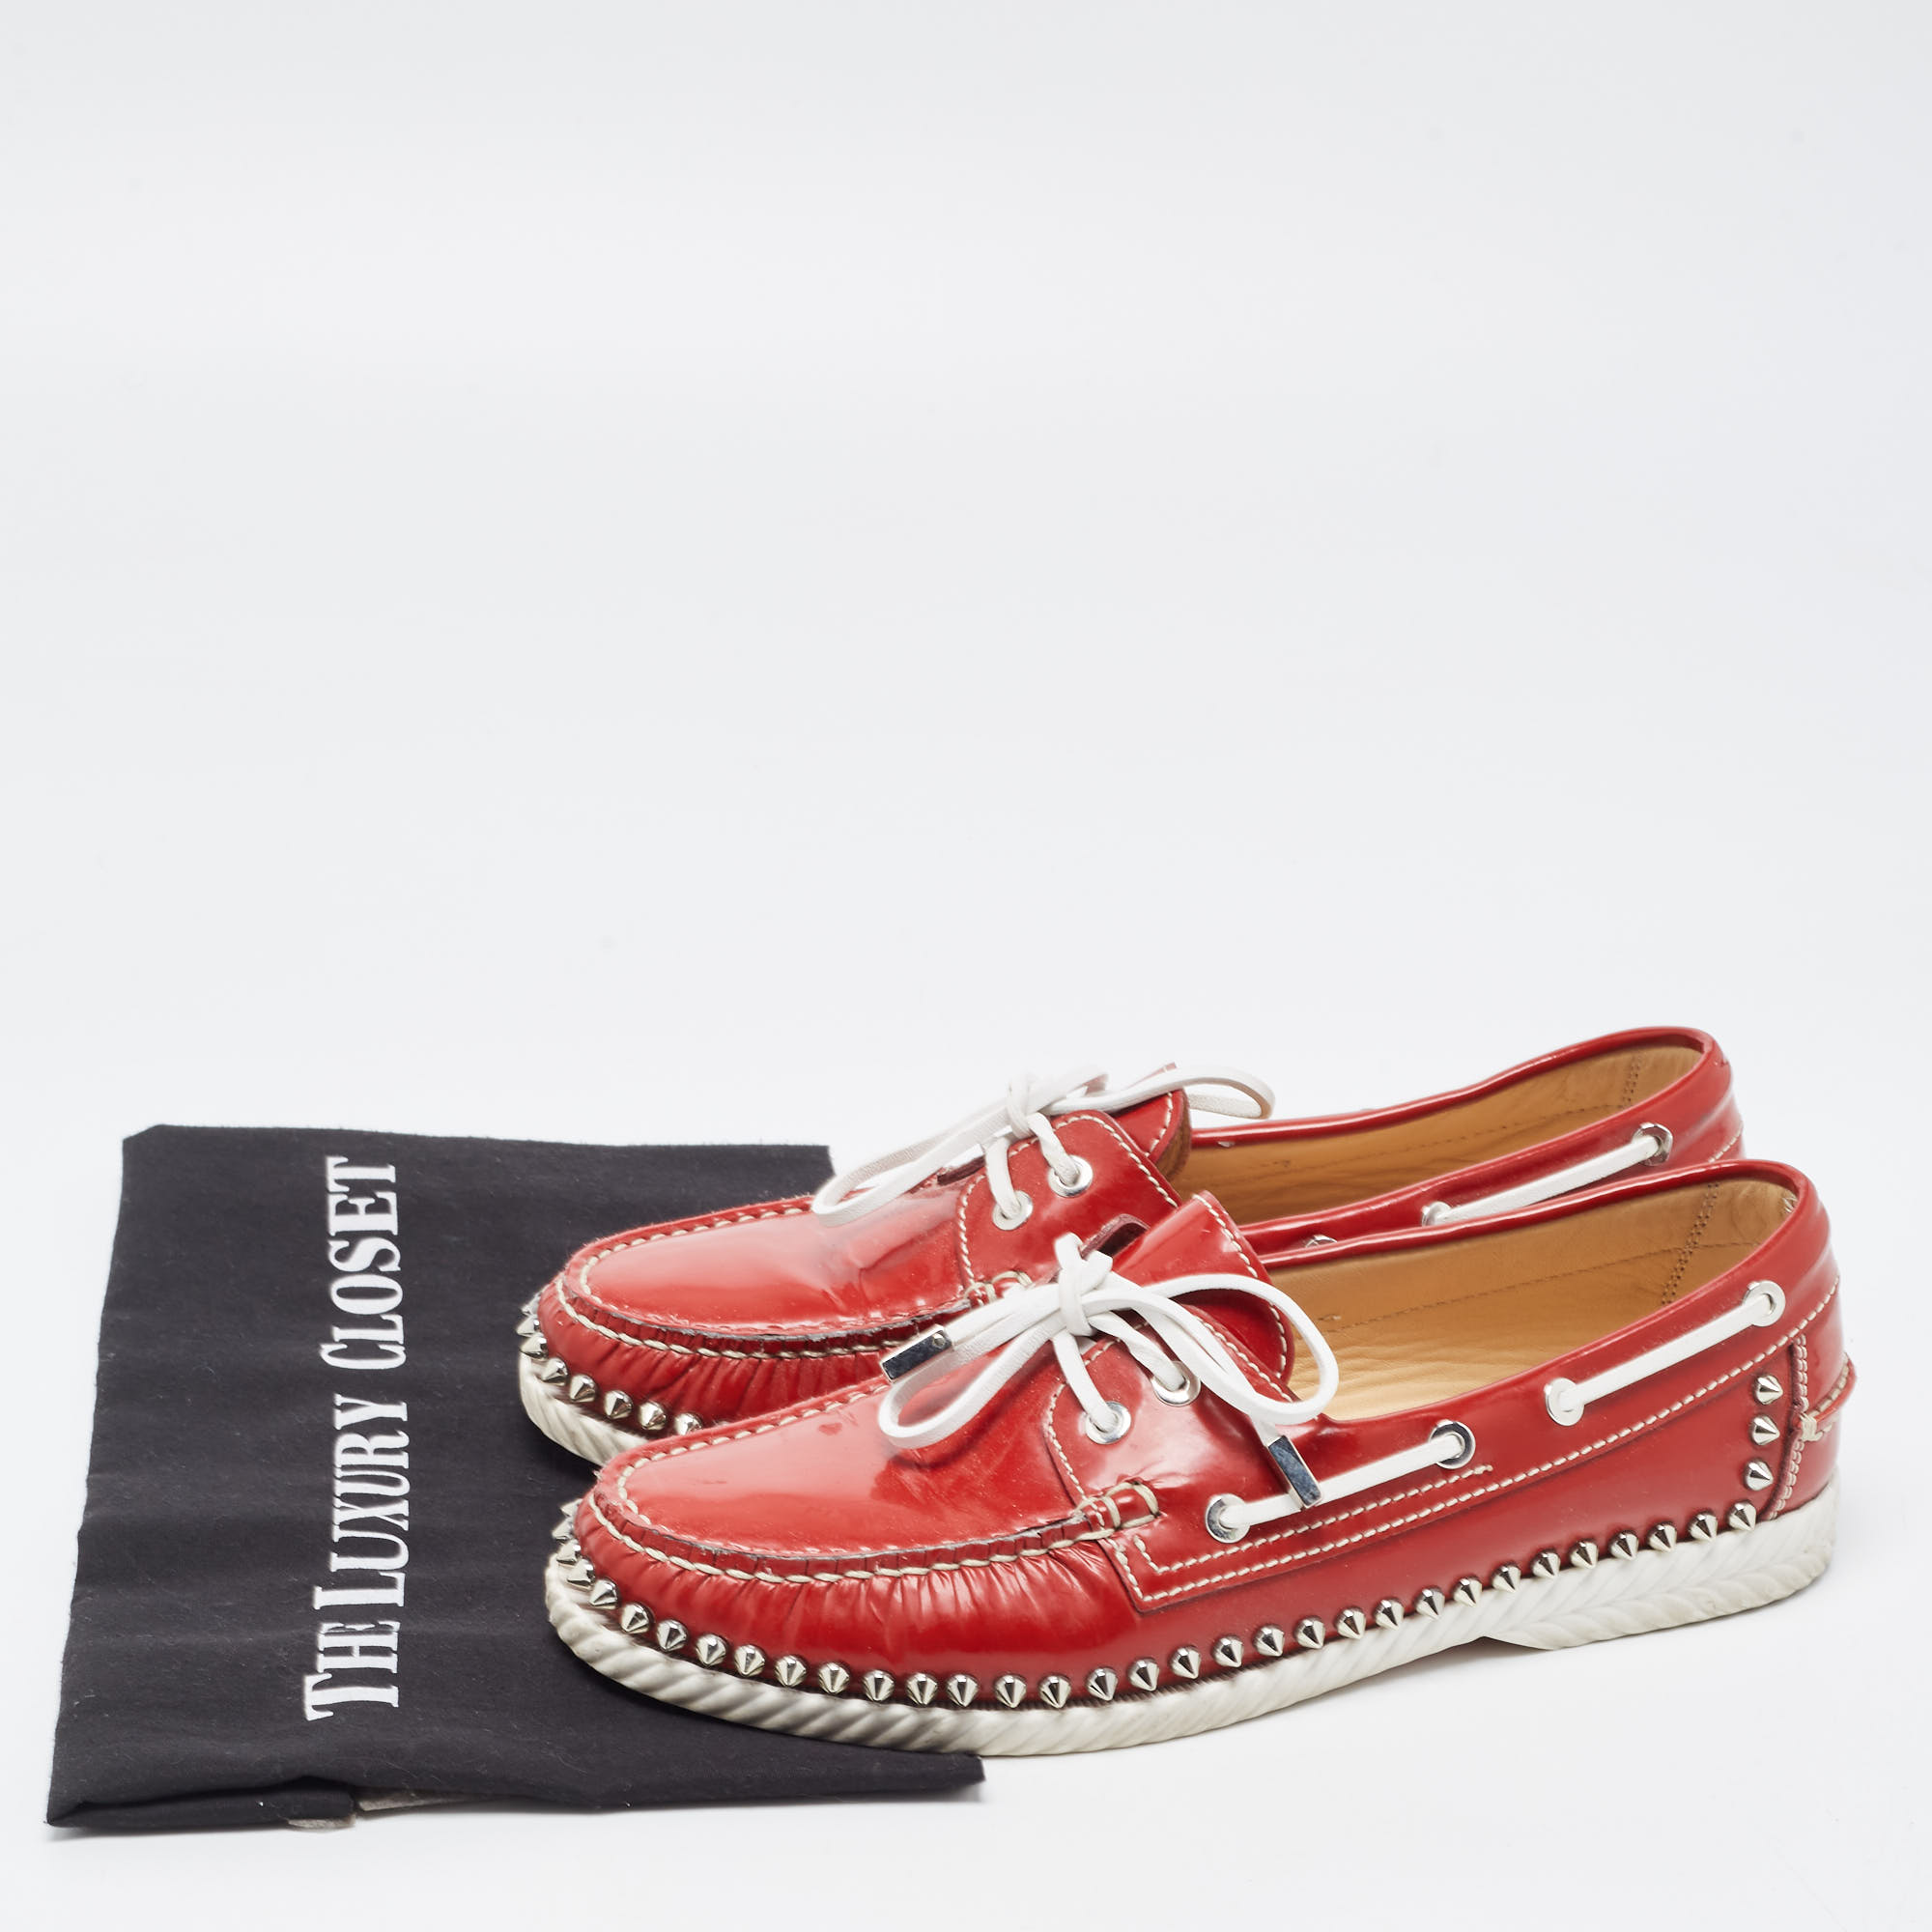 Christian Louboutin Red Patent Leather Steckel Spike Boat Loafers Size 40.5